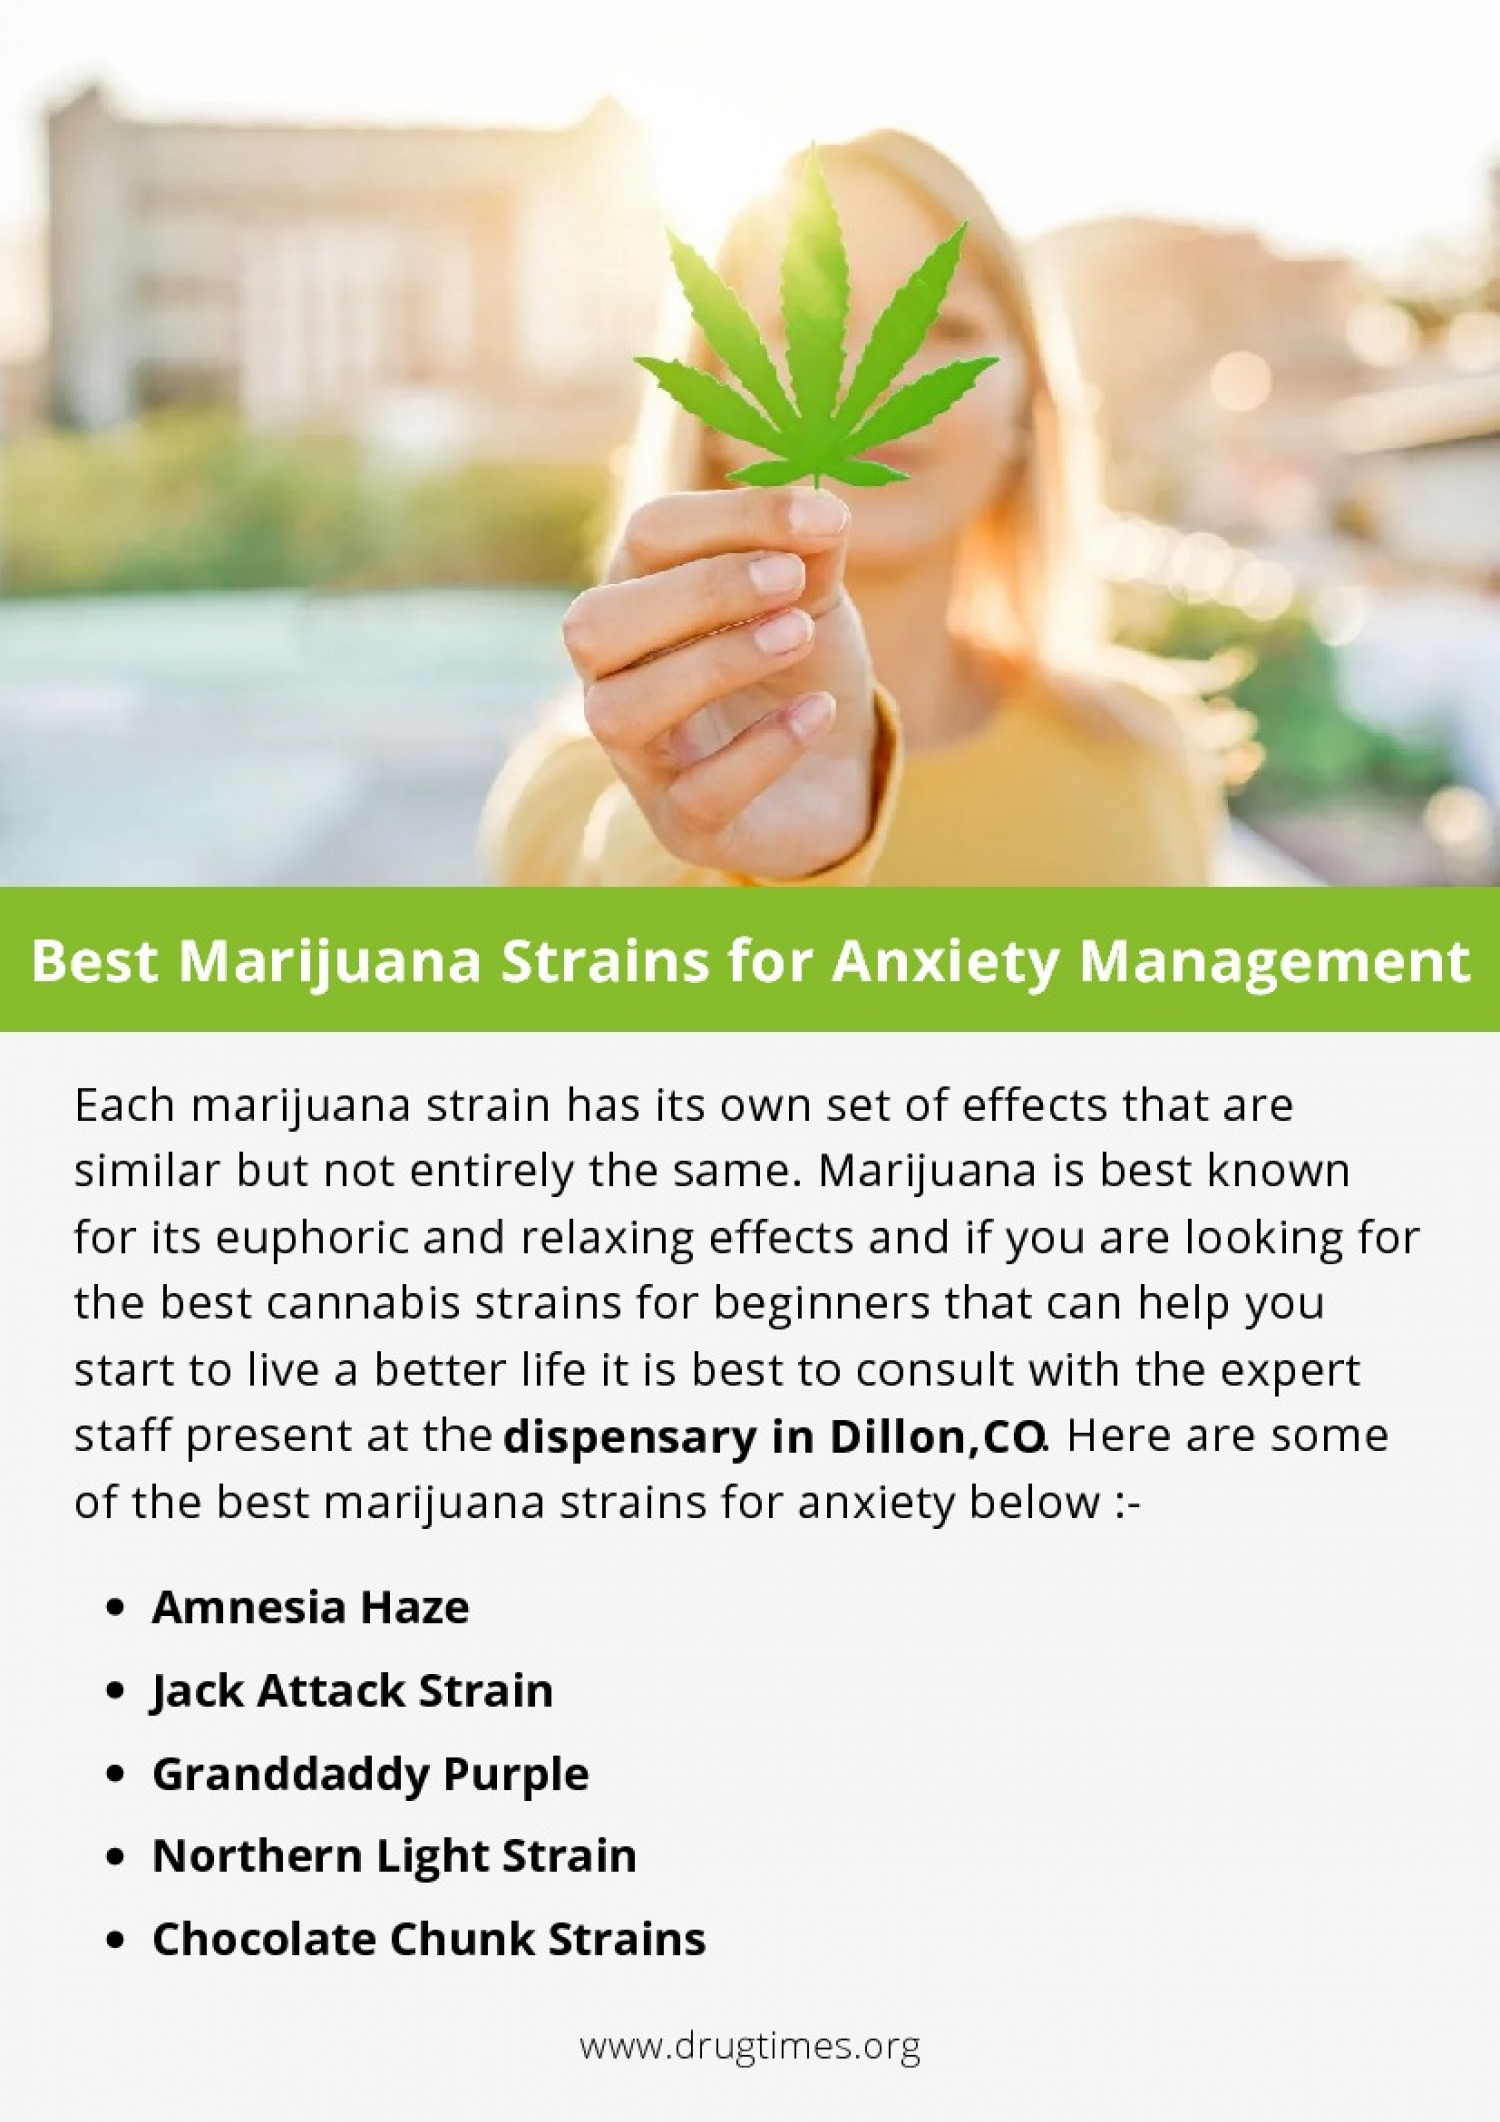 Strains for Anxiety Management Infographic